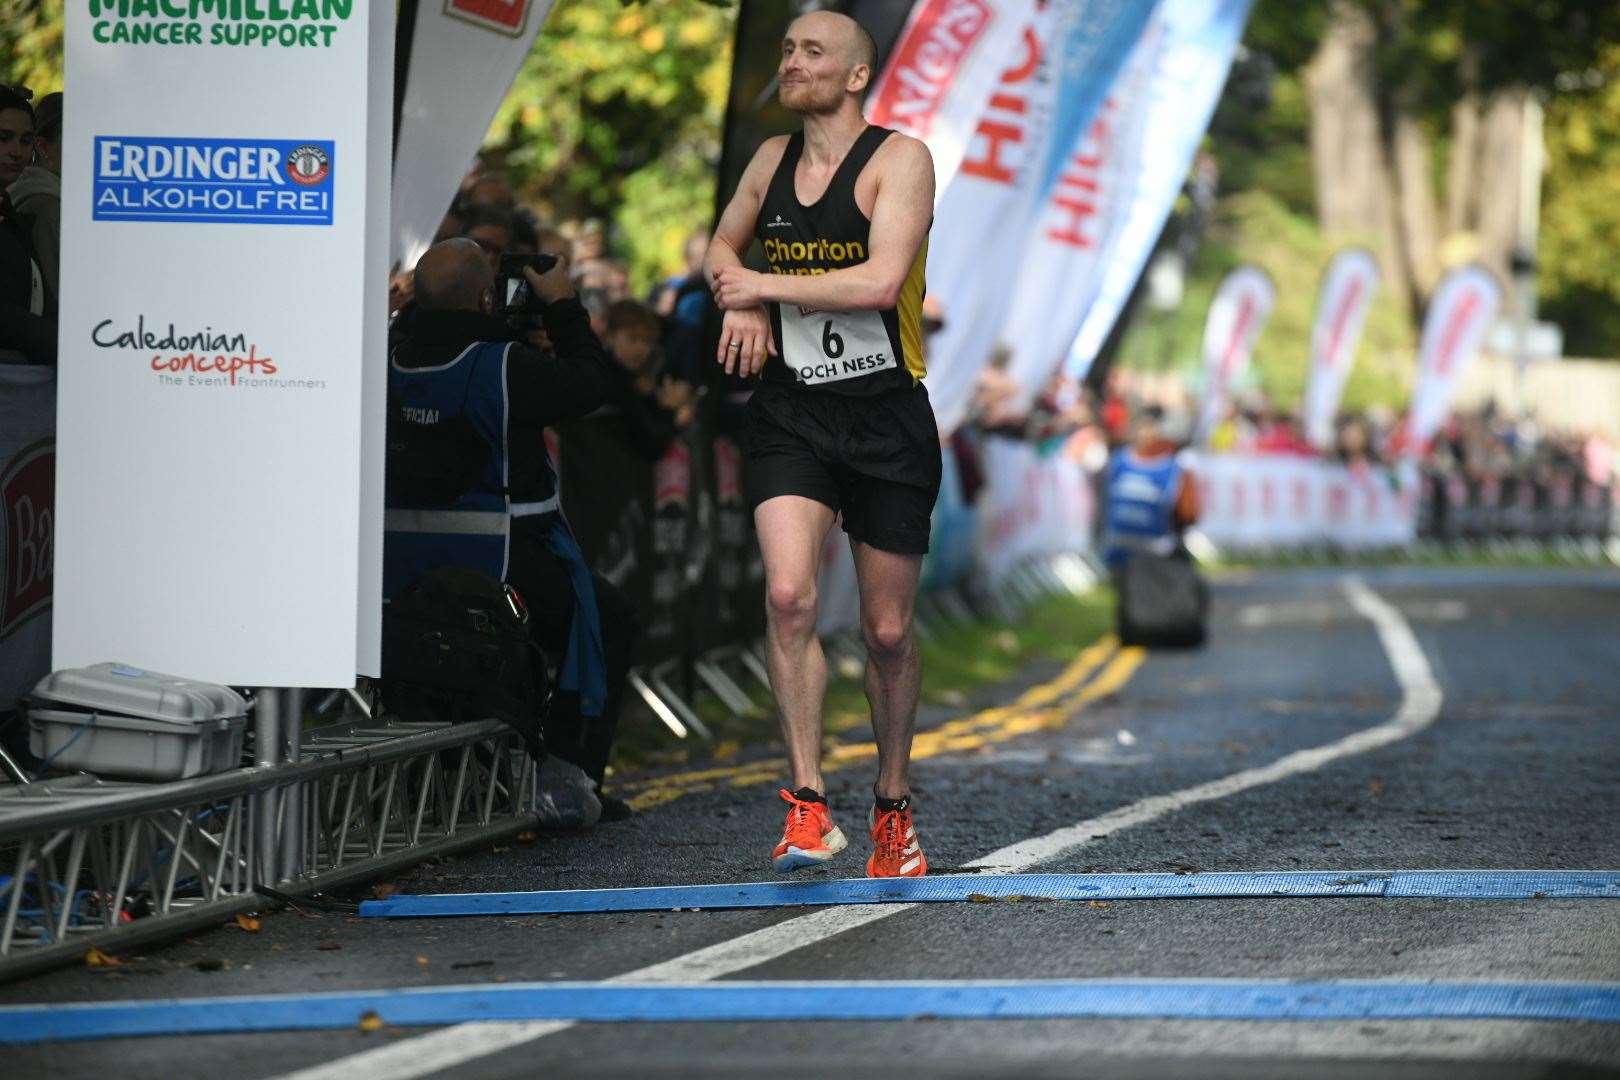 Tom Charles finishes in second place. Picture: James Mackenzie